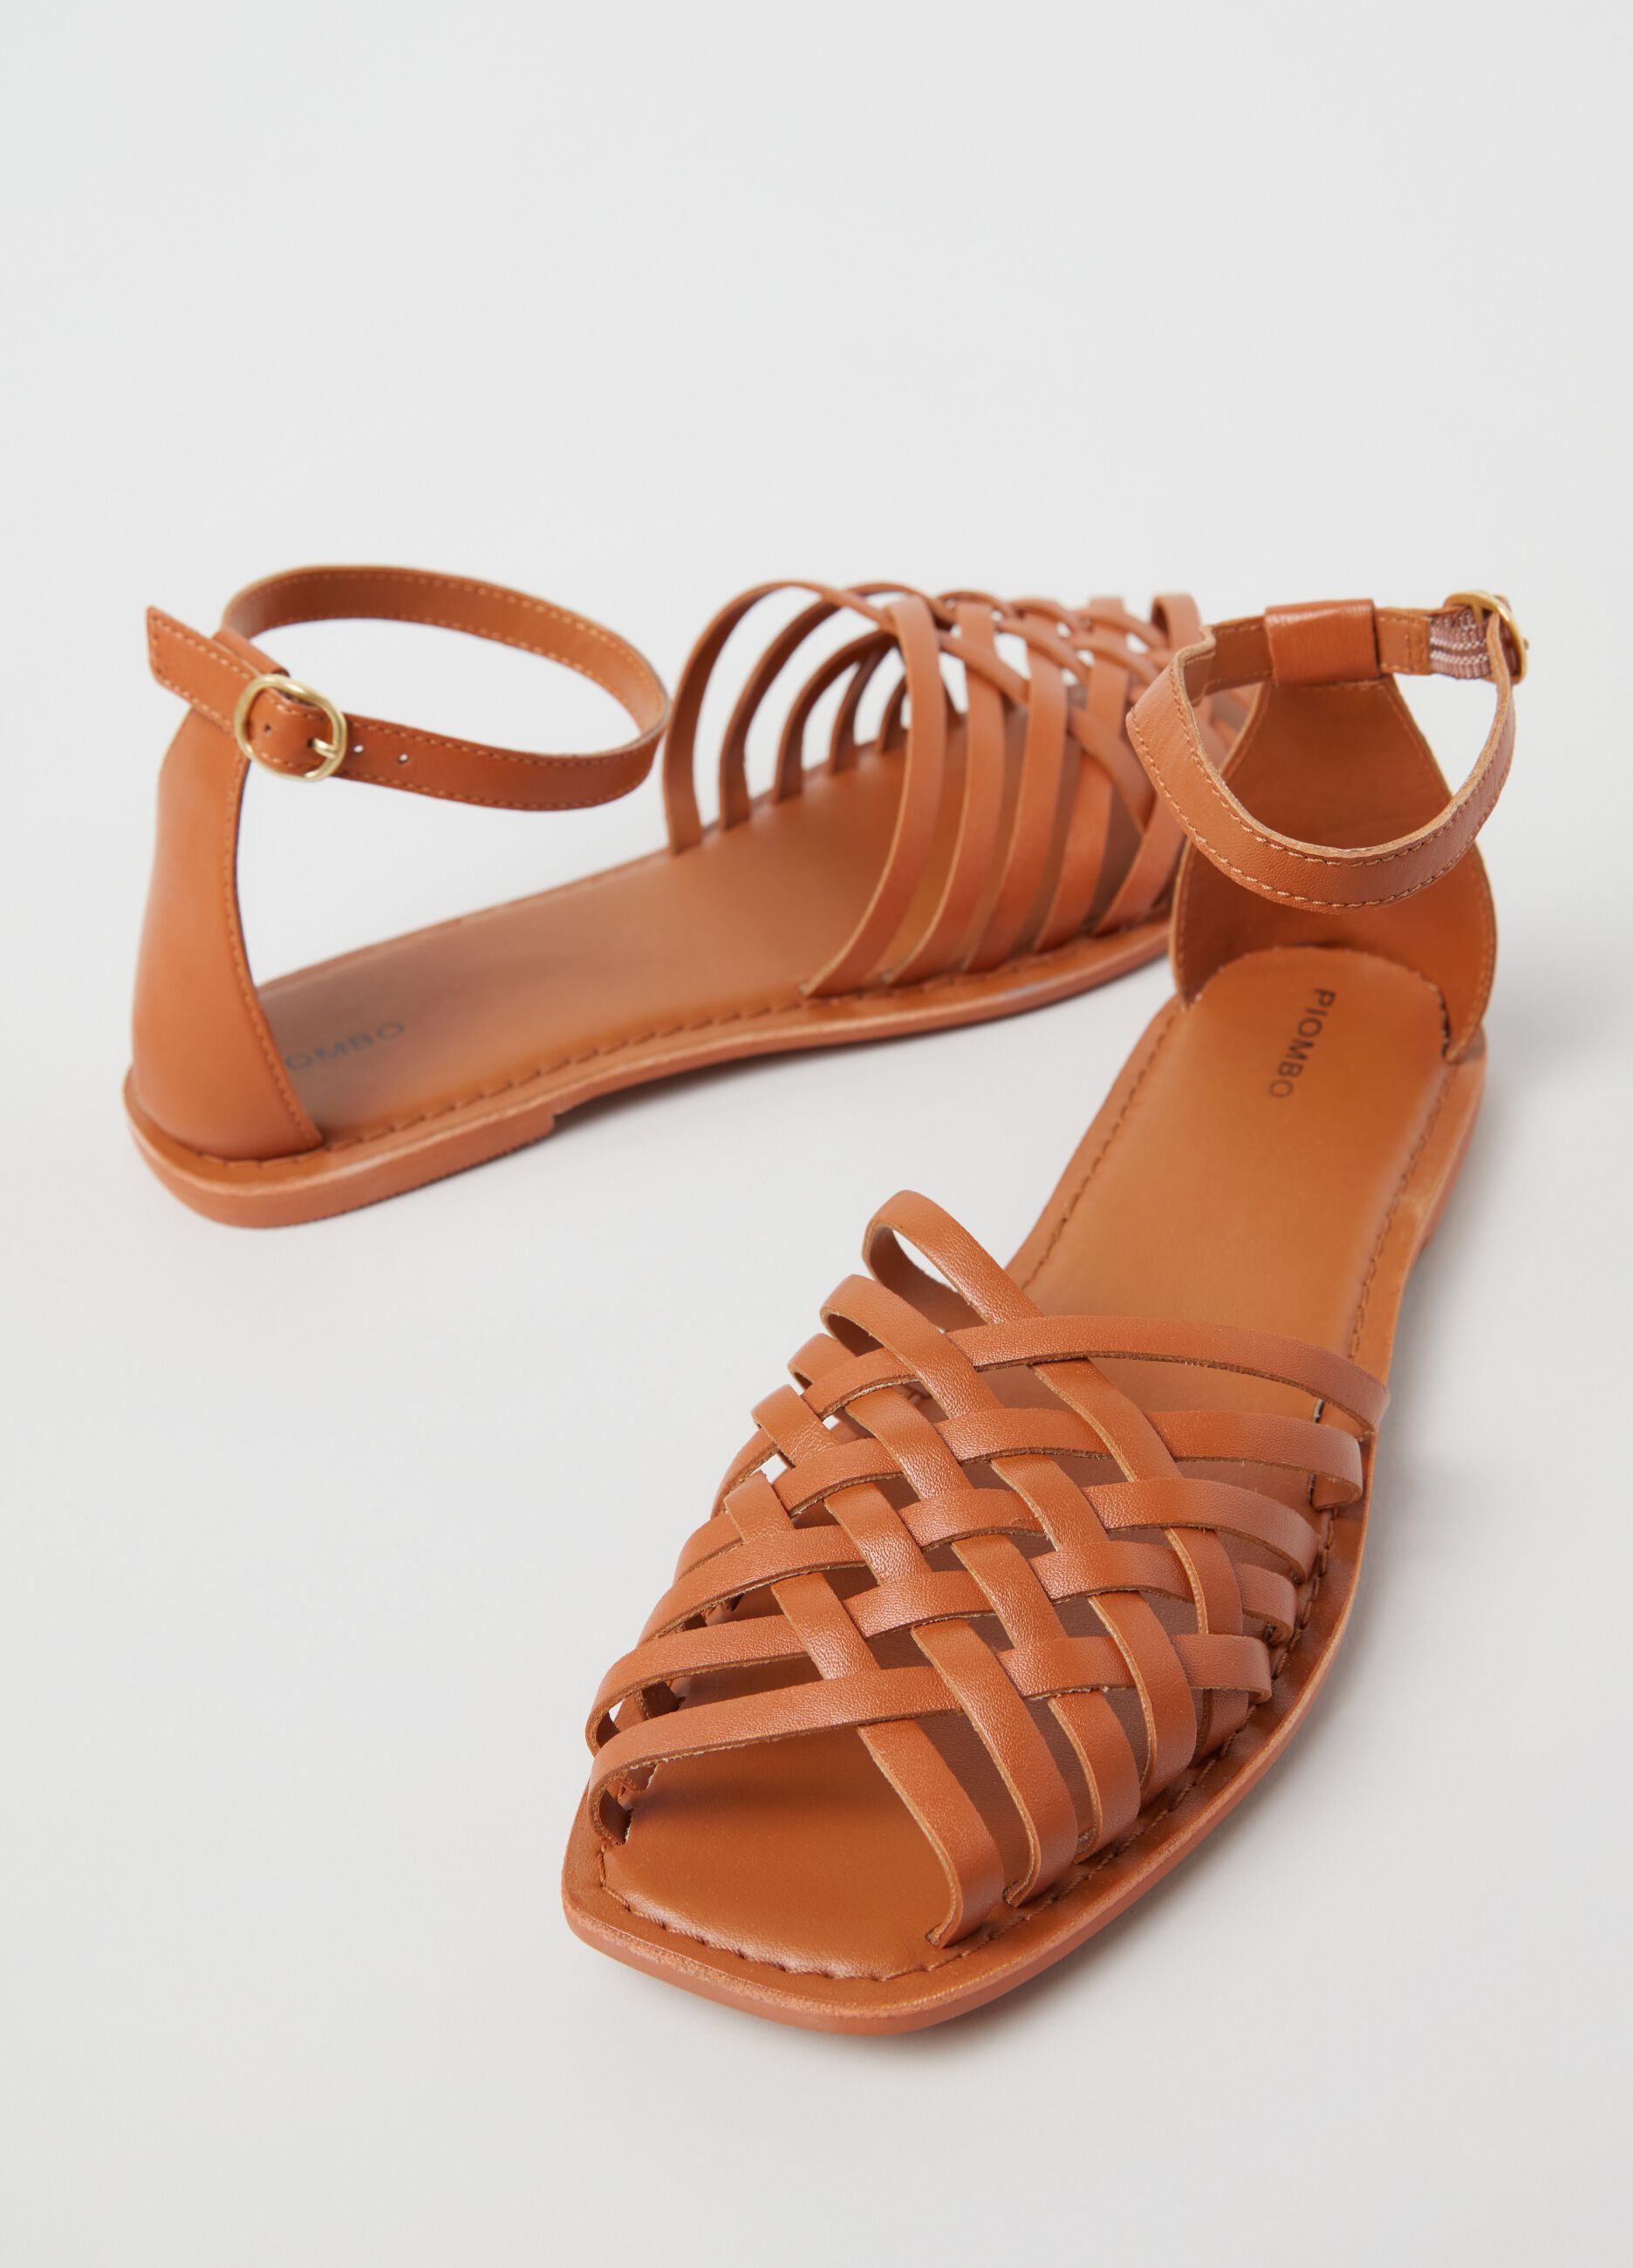 Sandals with crossover straps in leather